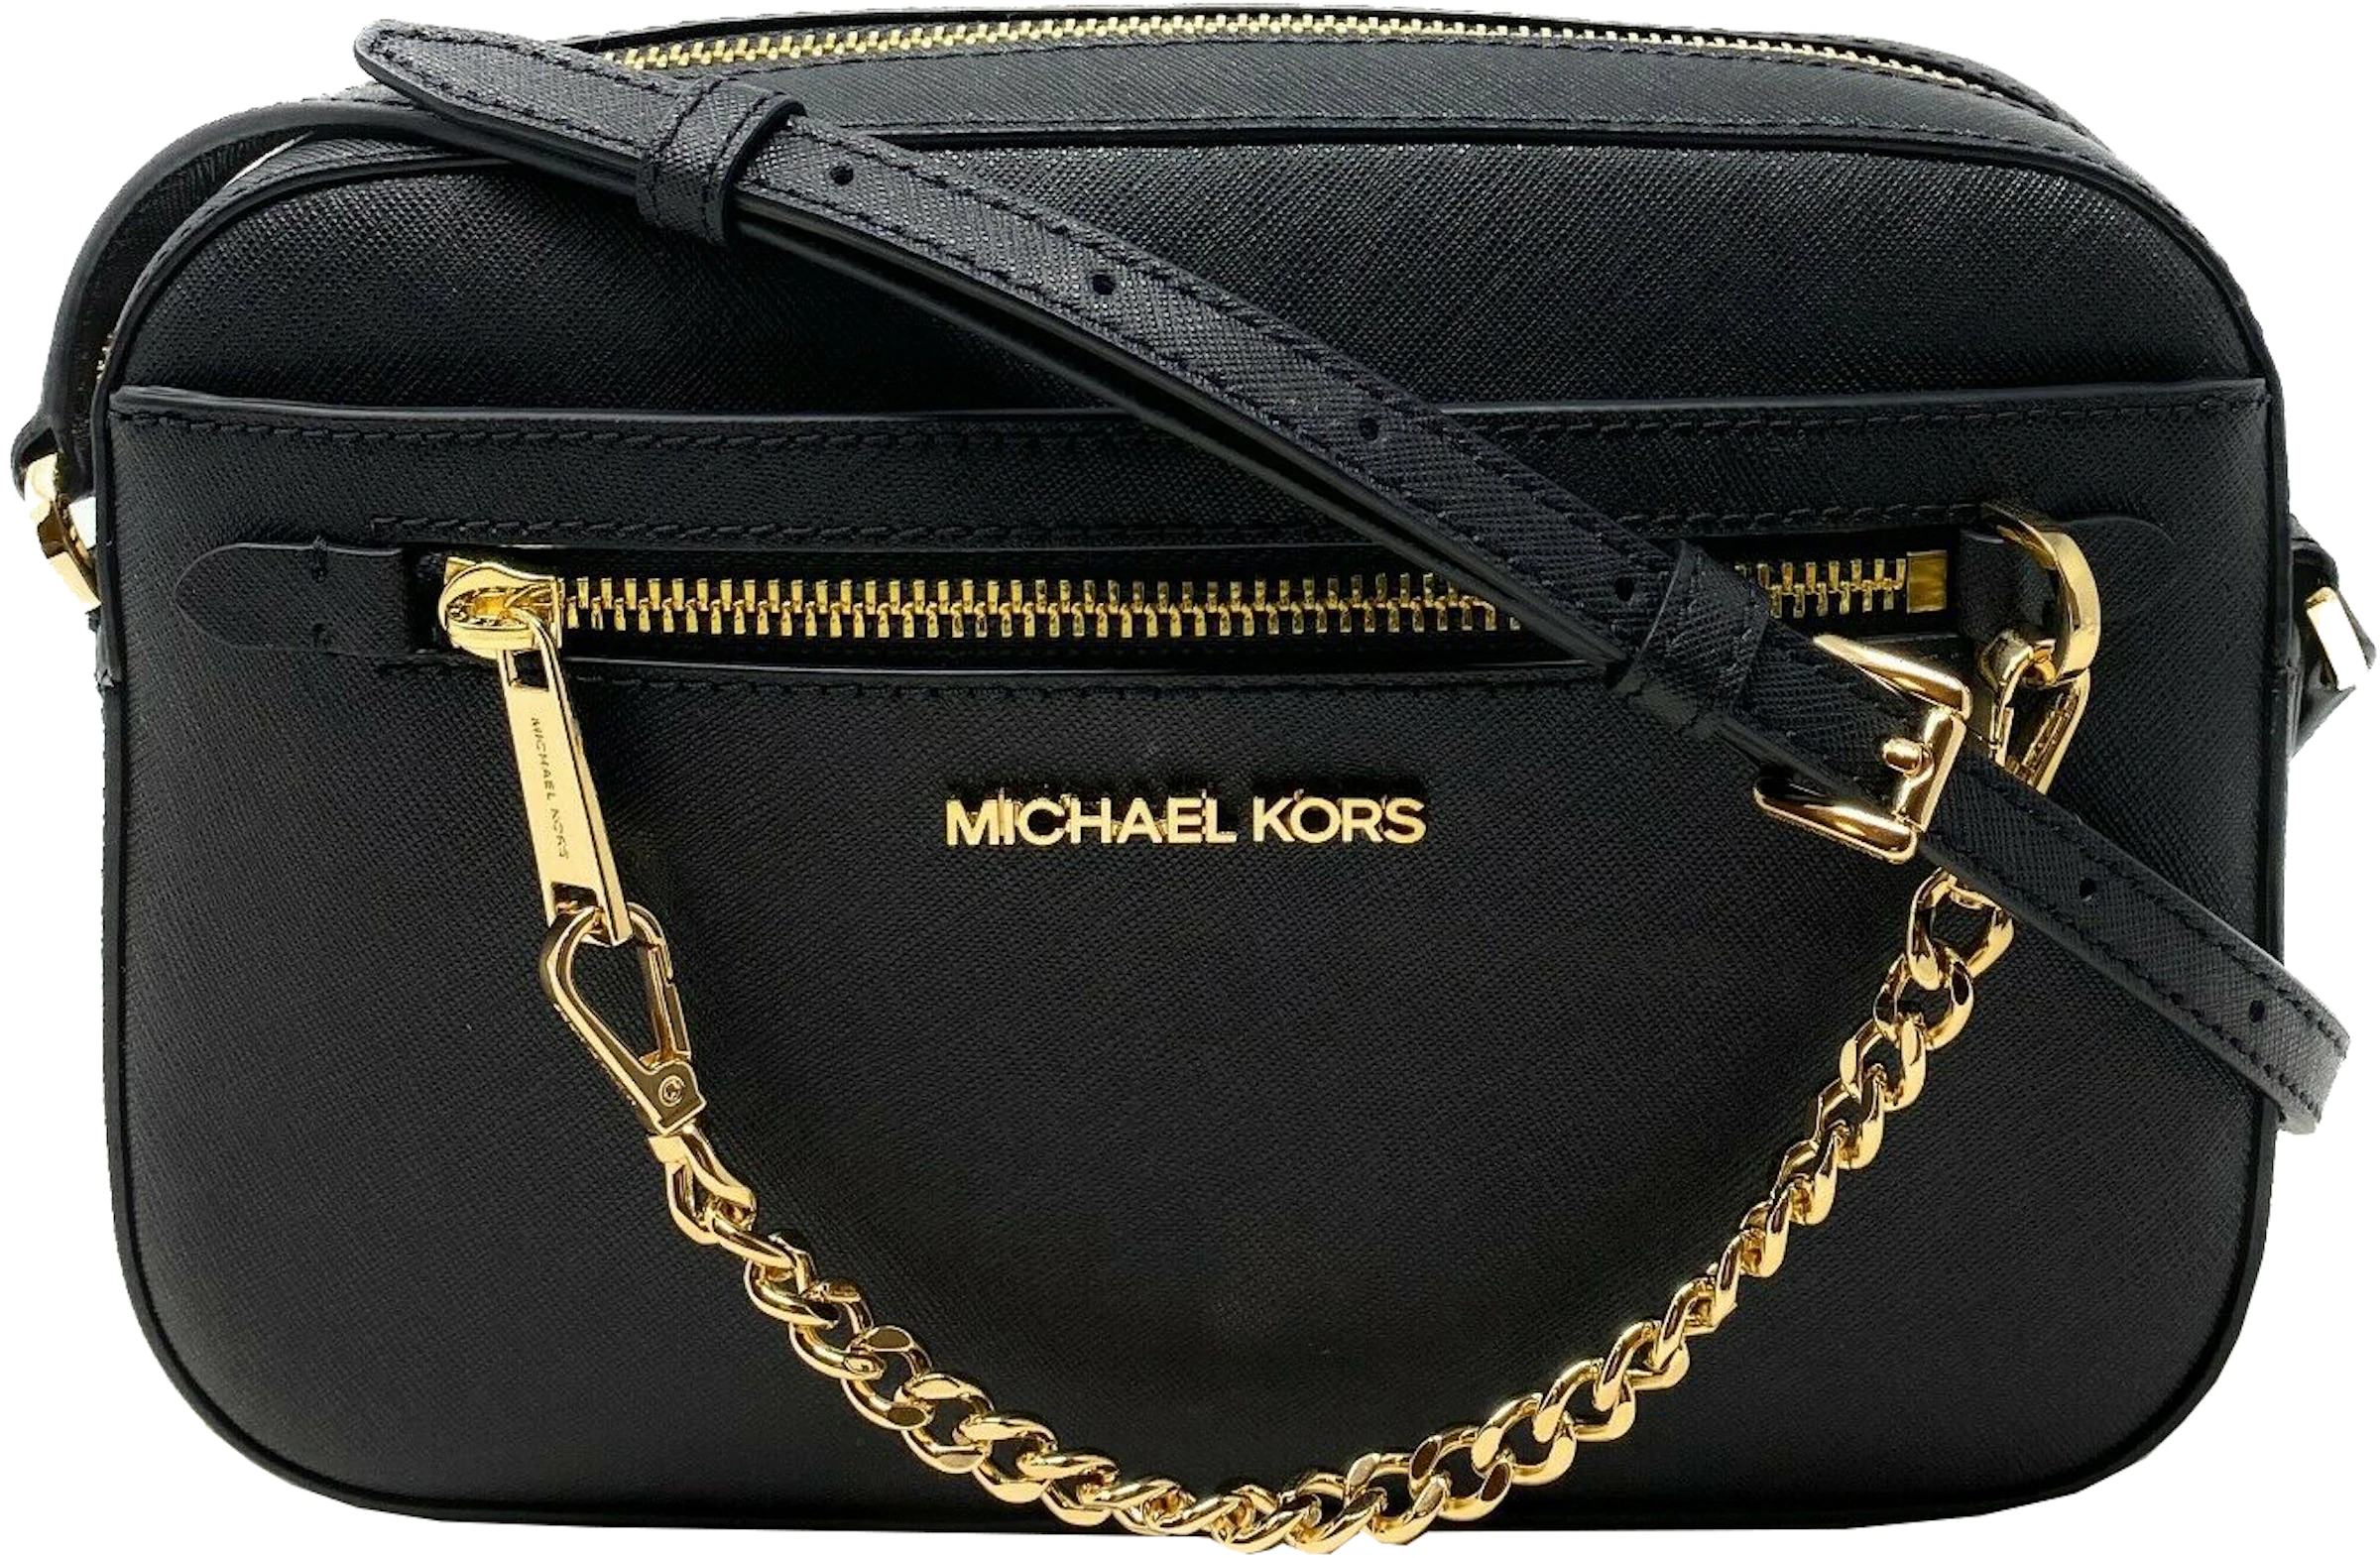 Top 58+ imagen michael kors purse black with gold chain - Thptnganamst ...